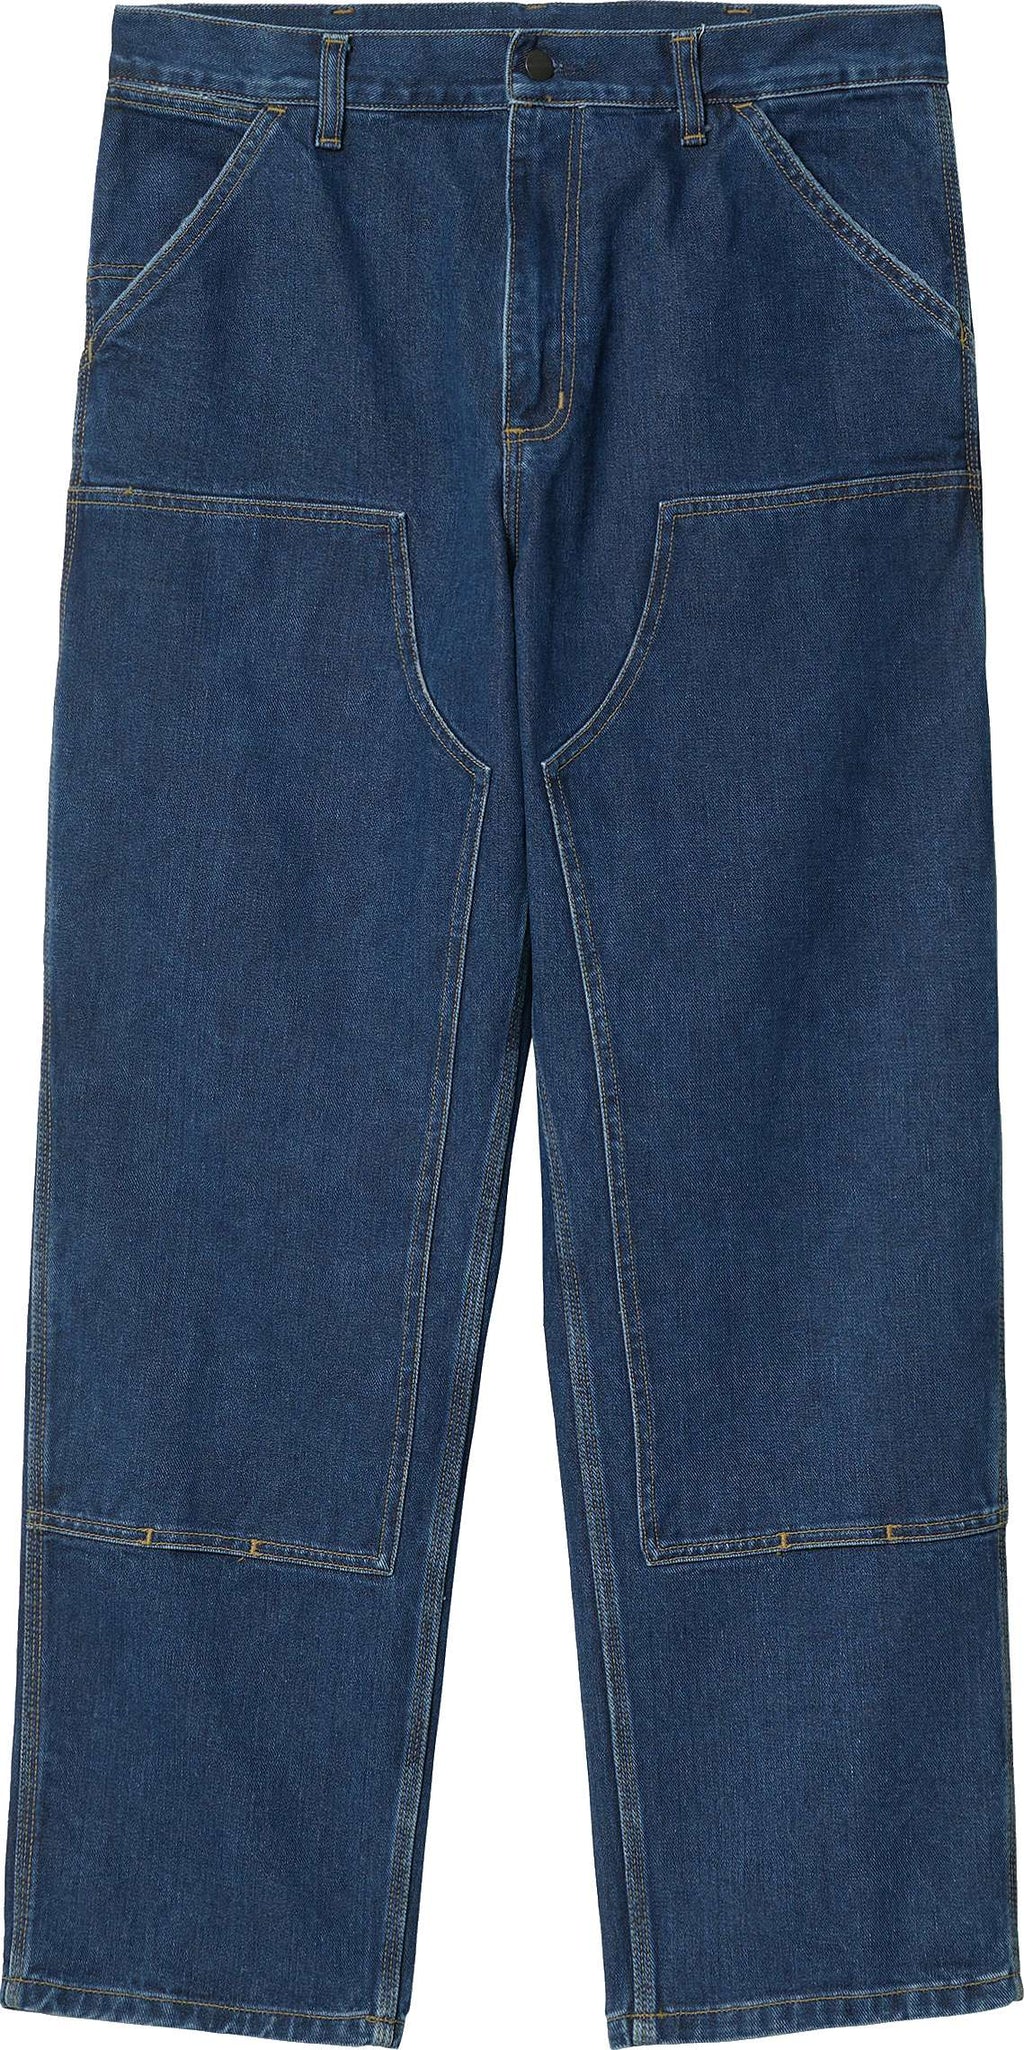  Carhartt Wip Jeans Double Knee Pant Blue Stone Washed Uomo - 1